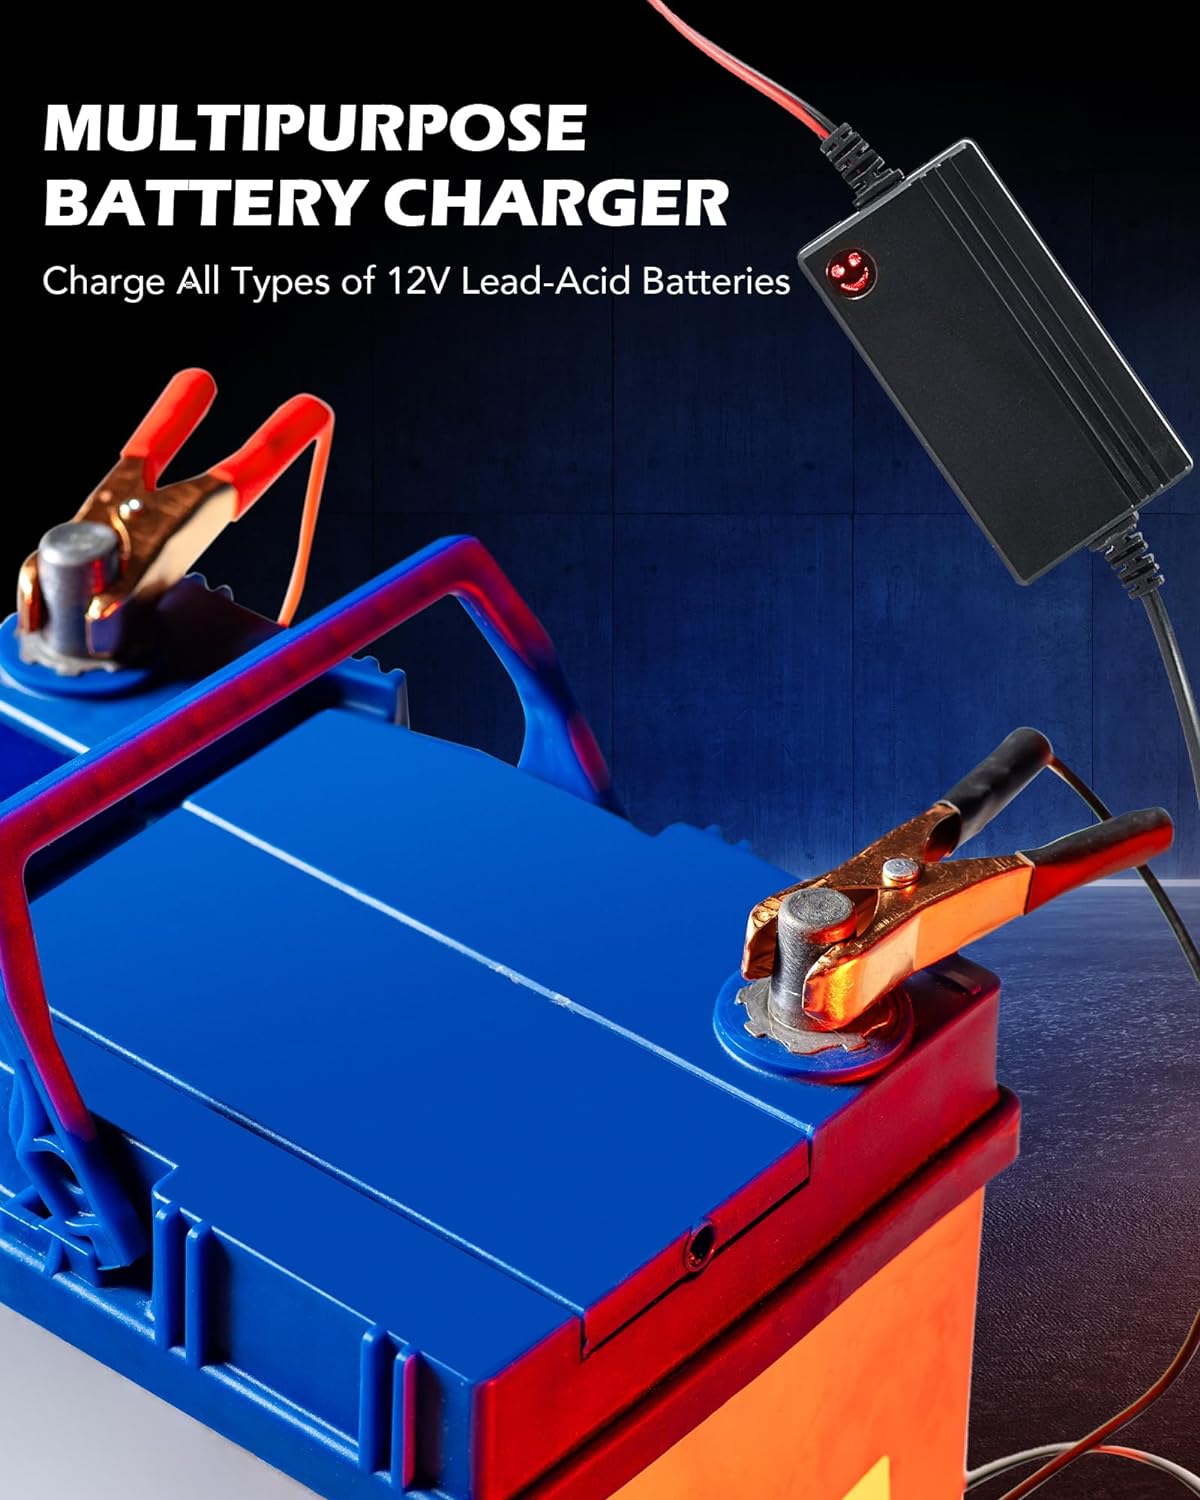 Orion Motor Tech 12V Battery Charger Review